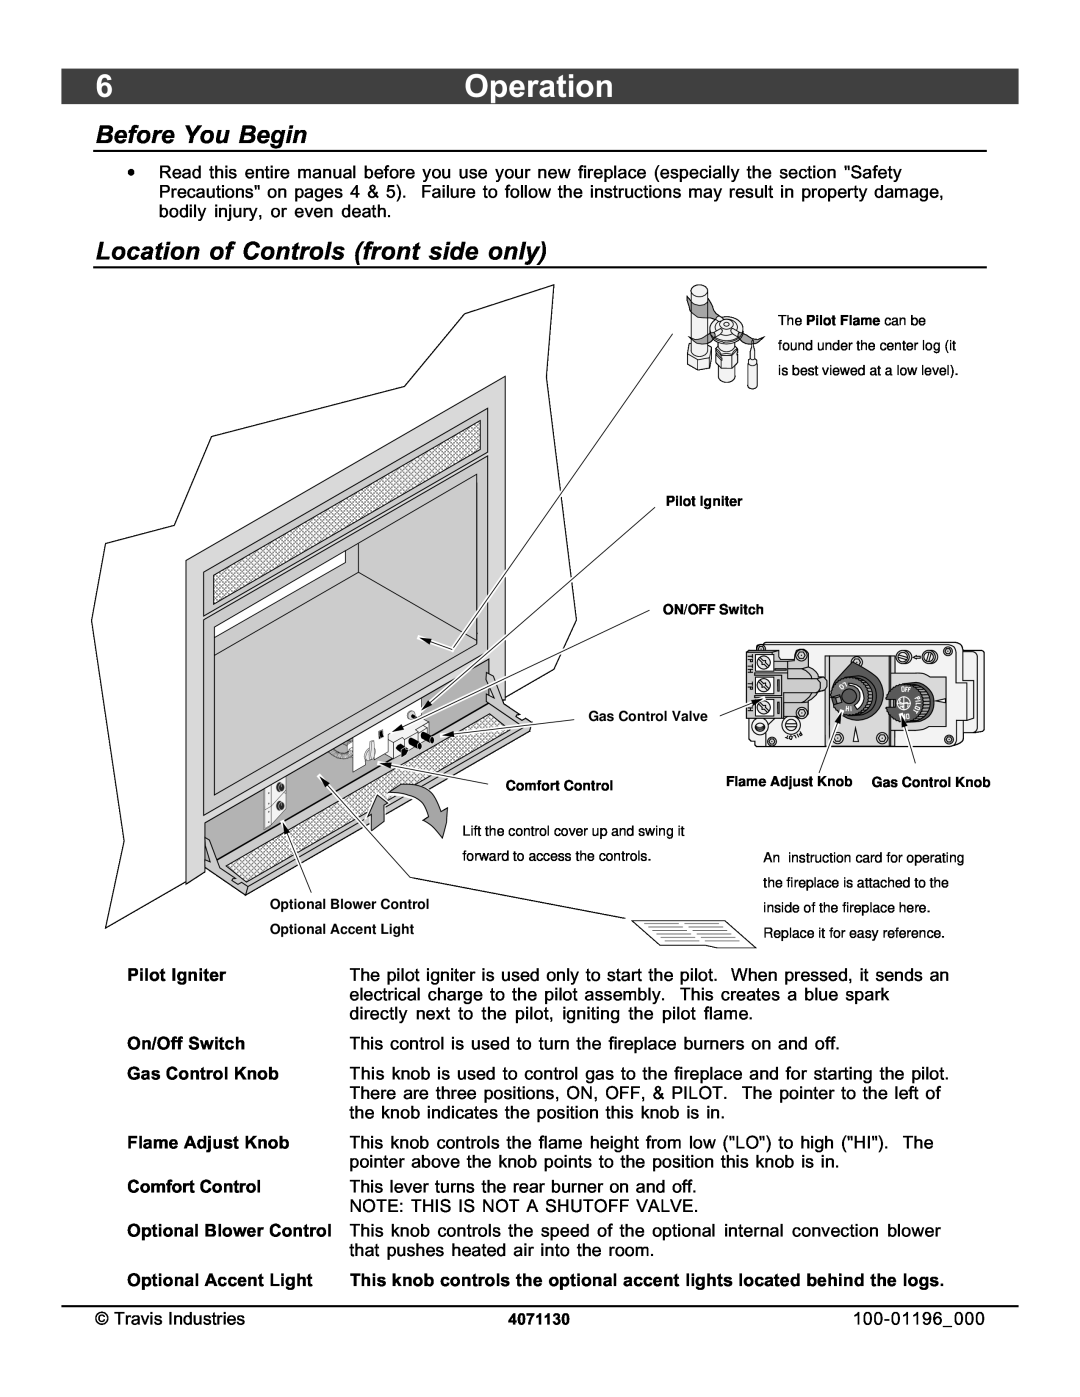 Lopi 864 ST owner manual 6Operation, Before You Begin, Location of Controls front side only, Pilot Igniter, On/Off Switch 